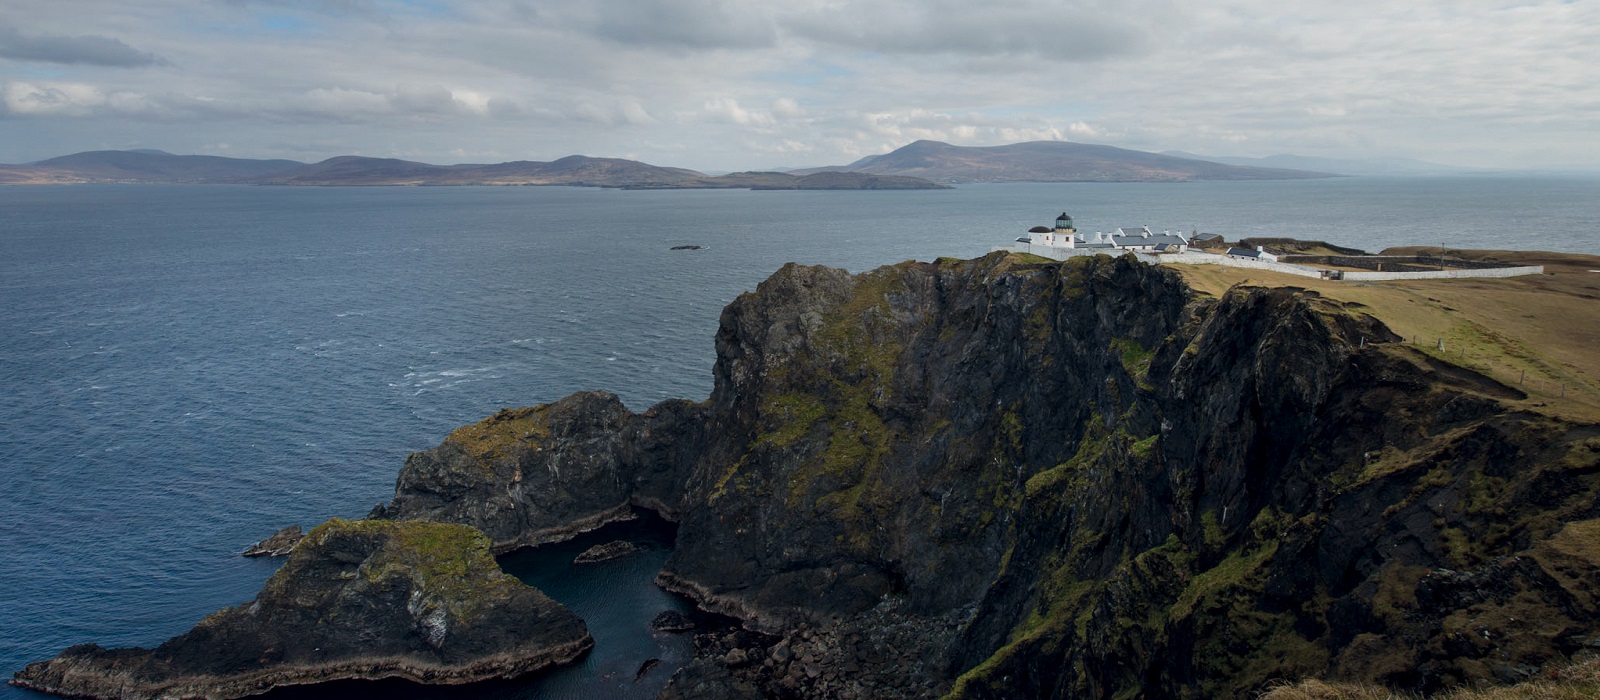 Clare Island Lighthouse, Clew Bay, Co. Mayo, Ireland. (See listing below).